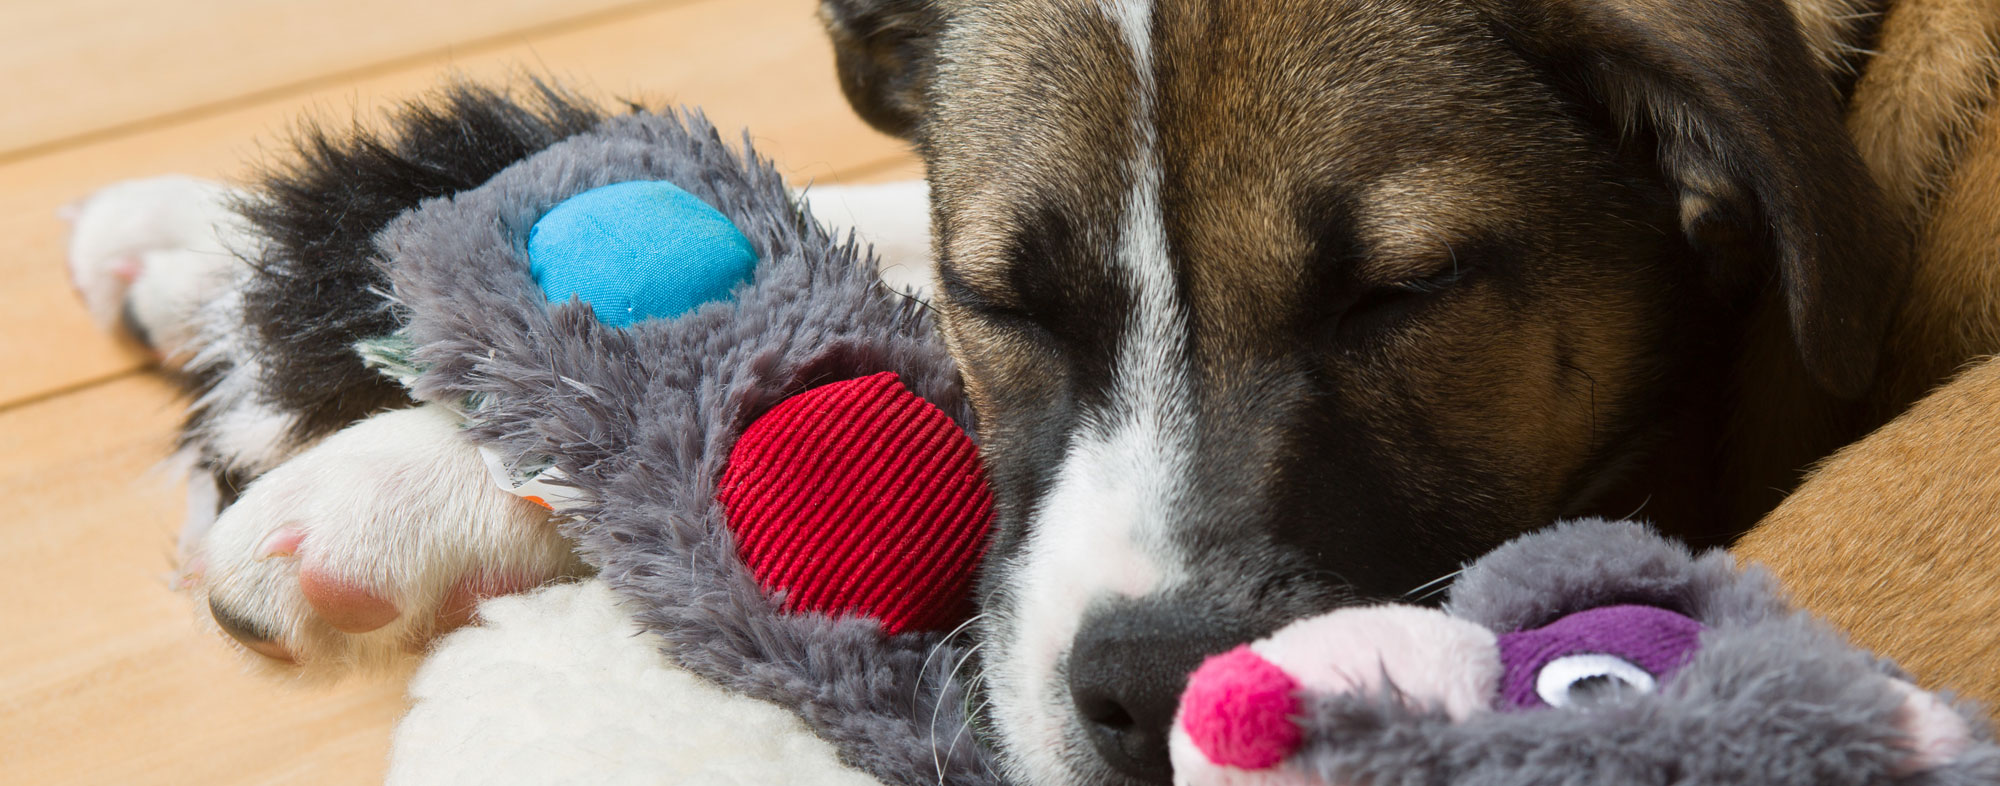 A dog can safely play with its toys, depending on how you clean them